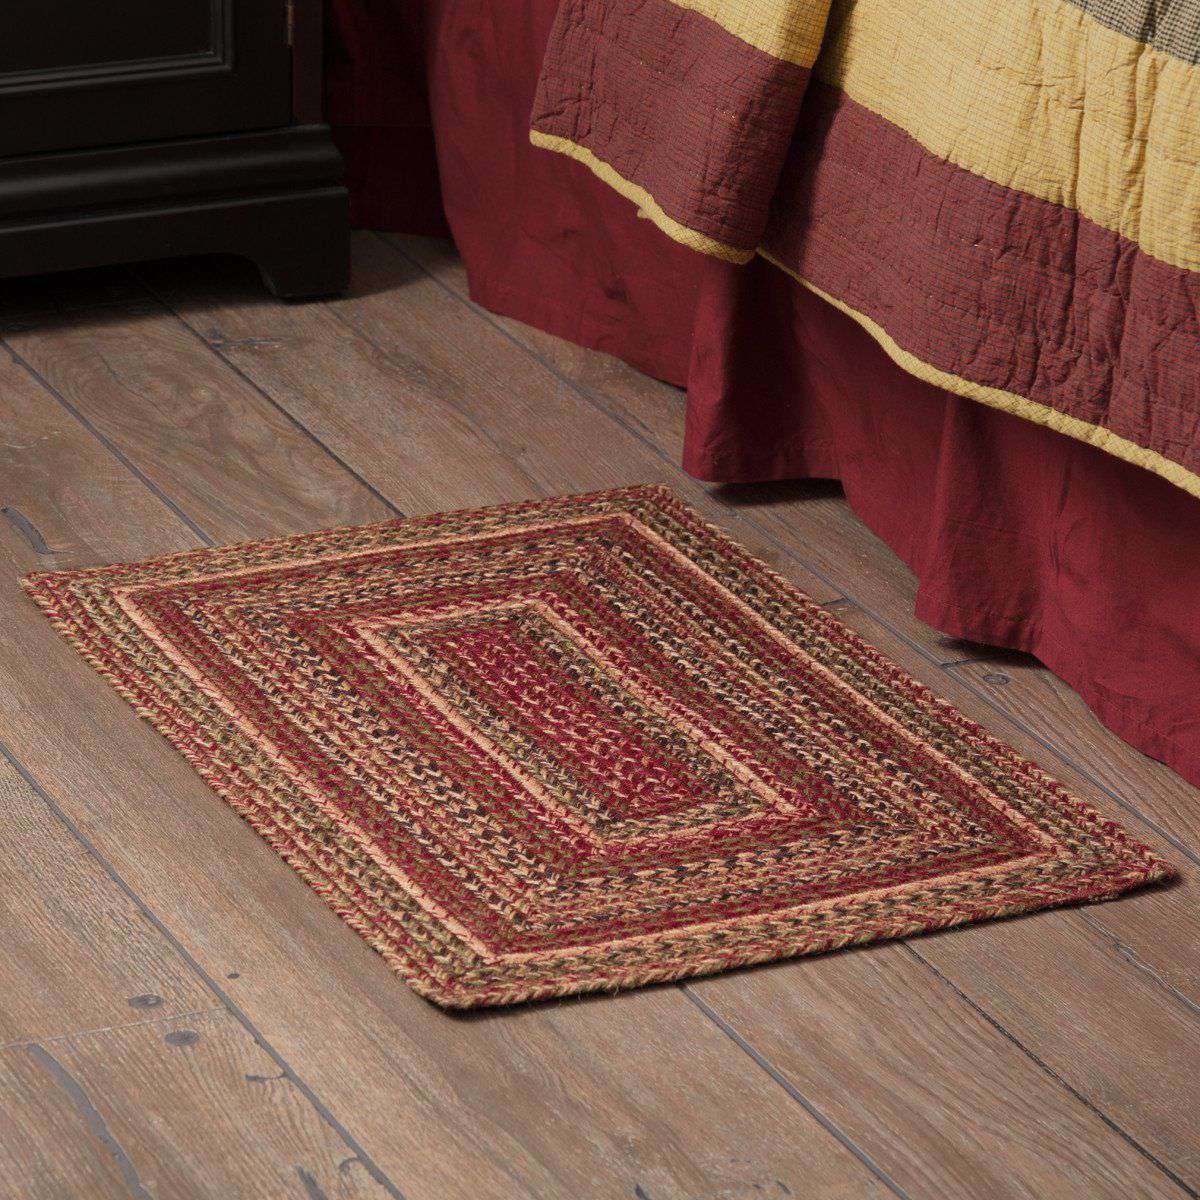 Cider Mill Jute Braided Rugs Rectangle VHC Brands Rugs VHC Brands 20" x 30" 